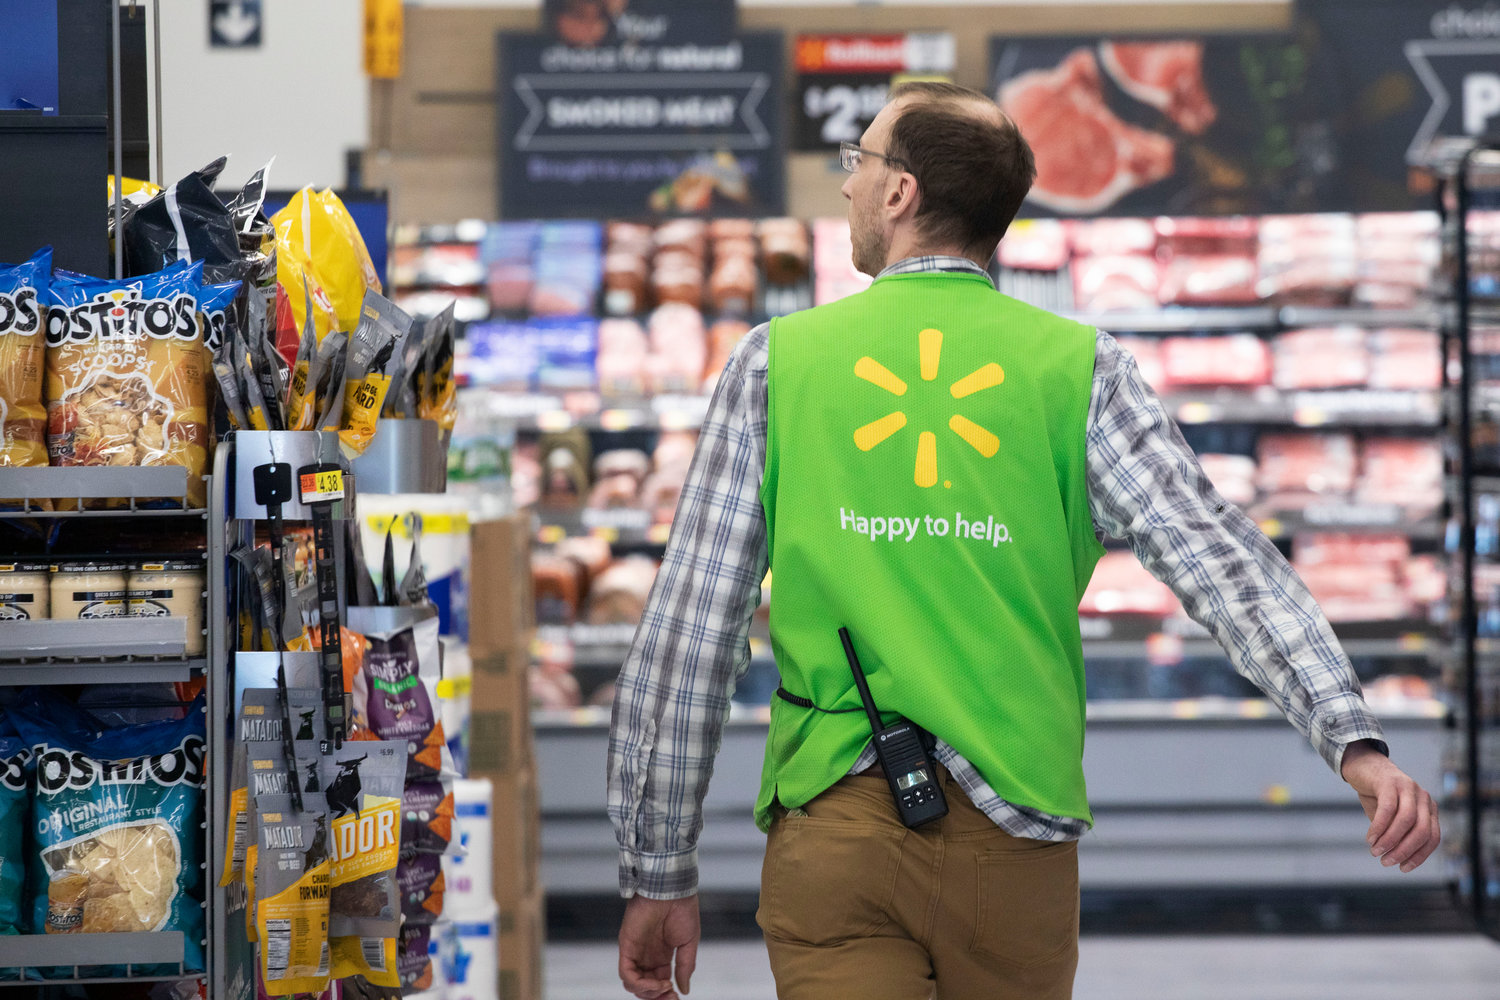 A Walmart associate works at a Walmart Neighborhood Market, Wednesday, April 24, 2019, in Levittown, N.Y.  The nation‚Äôs two major retailers _ Walmart and Target_ plan to push deals and other marketing gimmicks for the holiday shopping season earlier than last year as soaring inflation spurs customers to get a jump start on gift giving.   (AP Photo/Mark Lennihan, File)